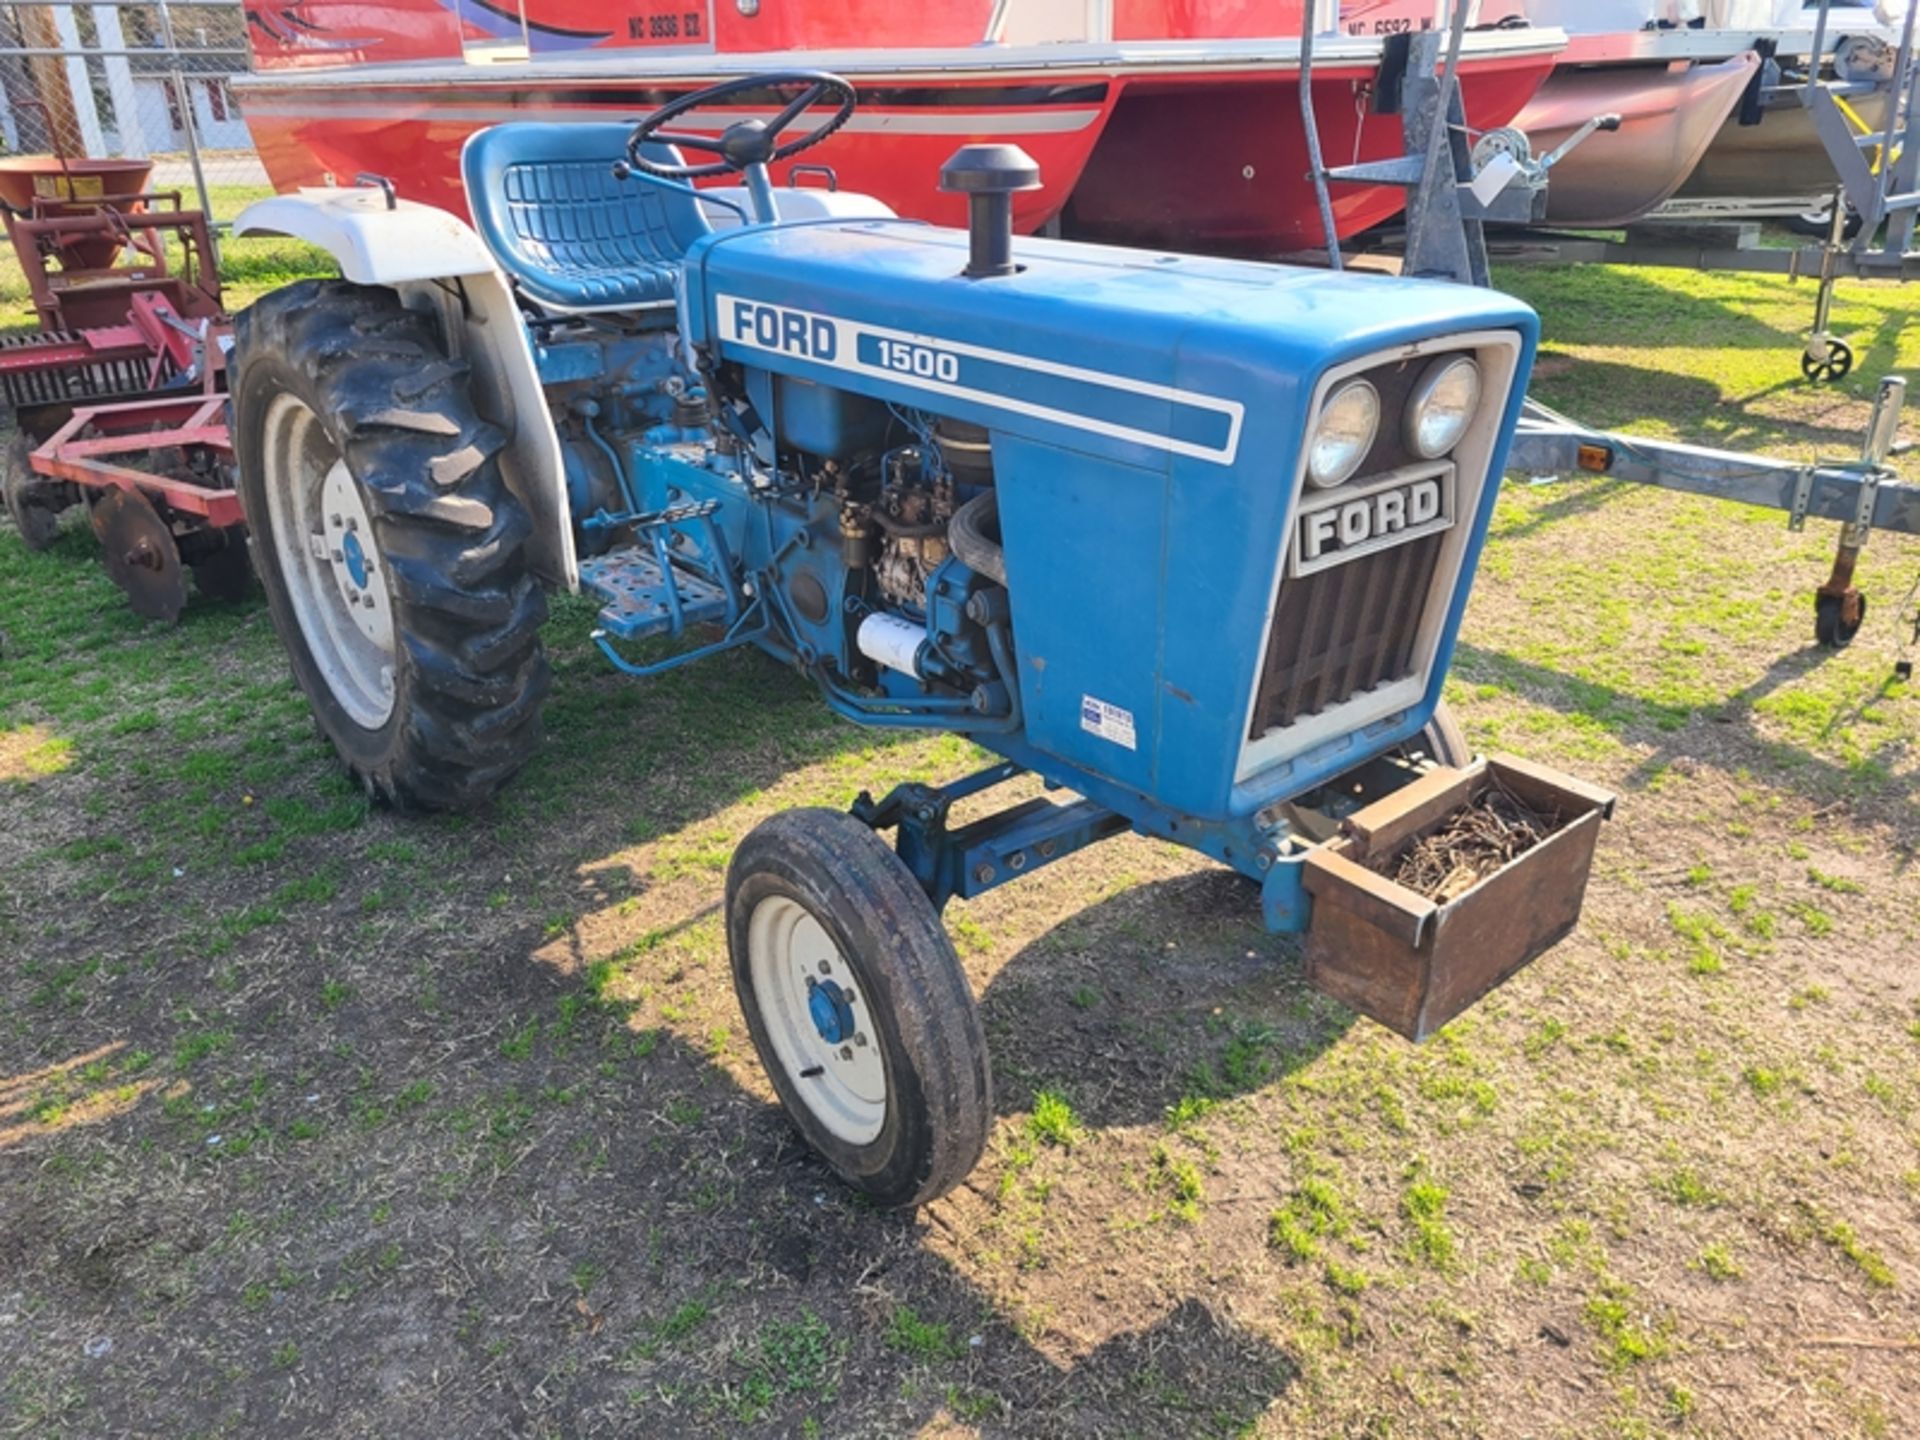 FORD 1500 2wd tractor with turf tires and regular tires - Image 2 of 5